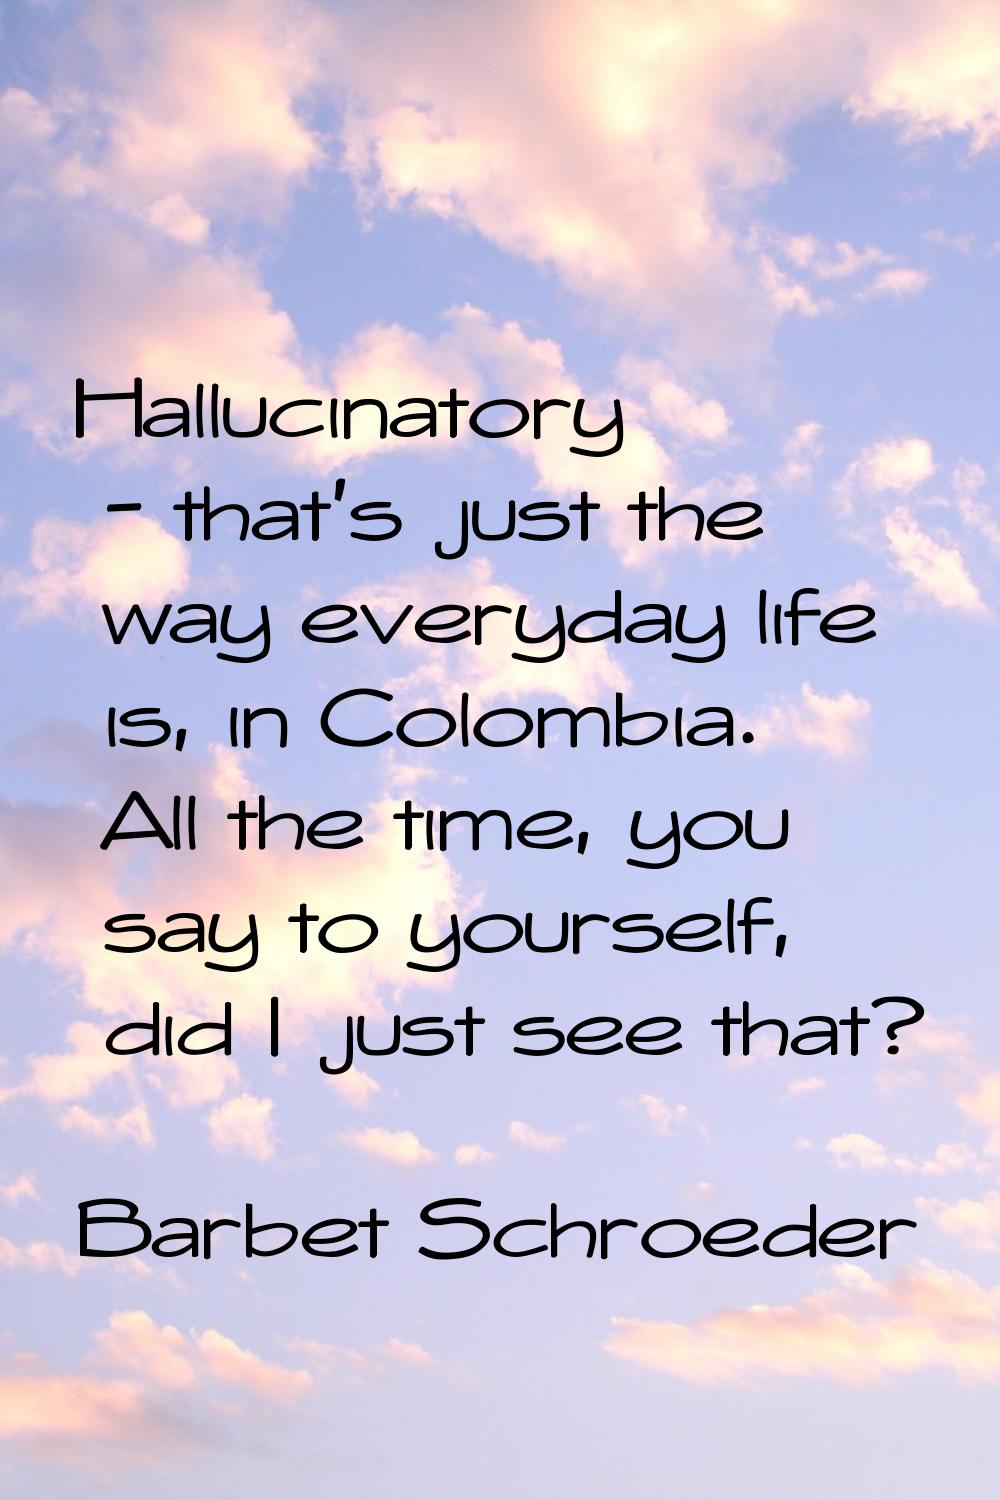 Hallucinatory - that's just the way everyday life is, in Colombia. All the time, you say to yoursel